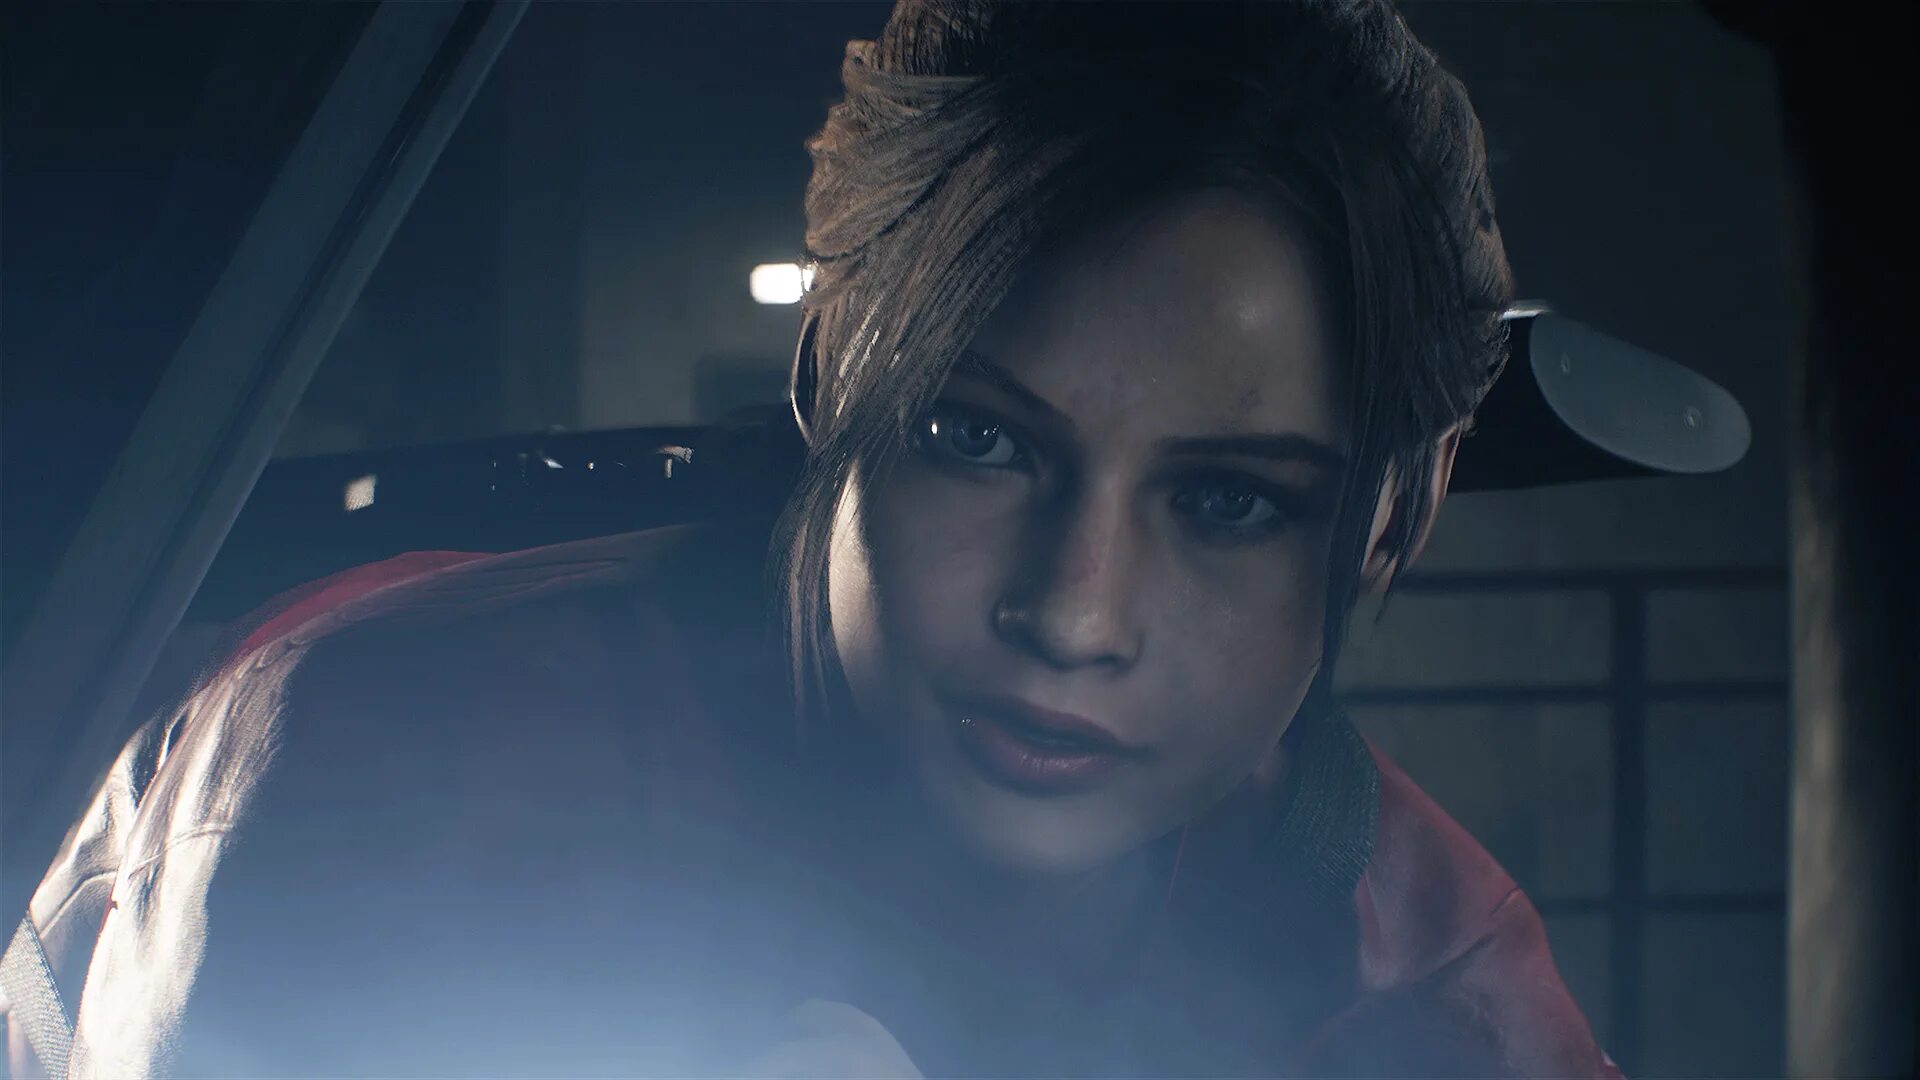 Claire Redfield Resident Evil 2 Remake. Клэр Редфилд Resident Evil 2 Remake. Клэр Редфилд обитель зла 3. Клэр Редфилд 2019. Resident evil 2 часть